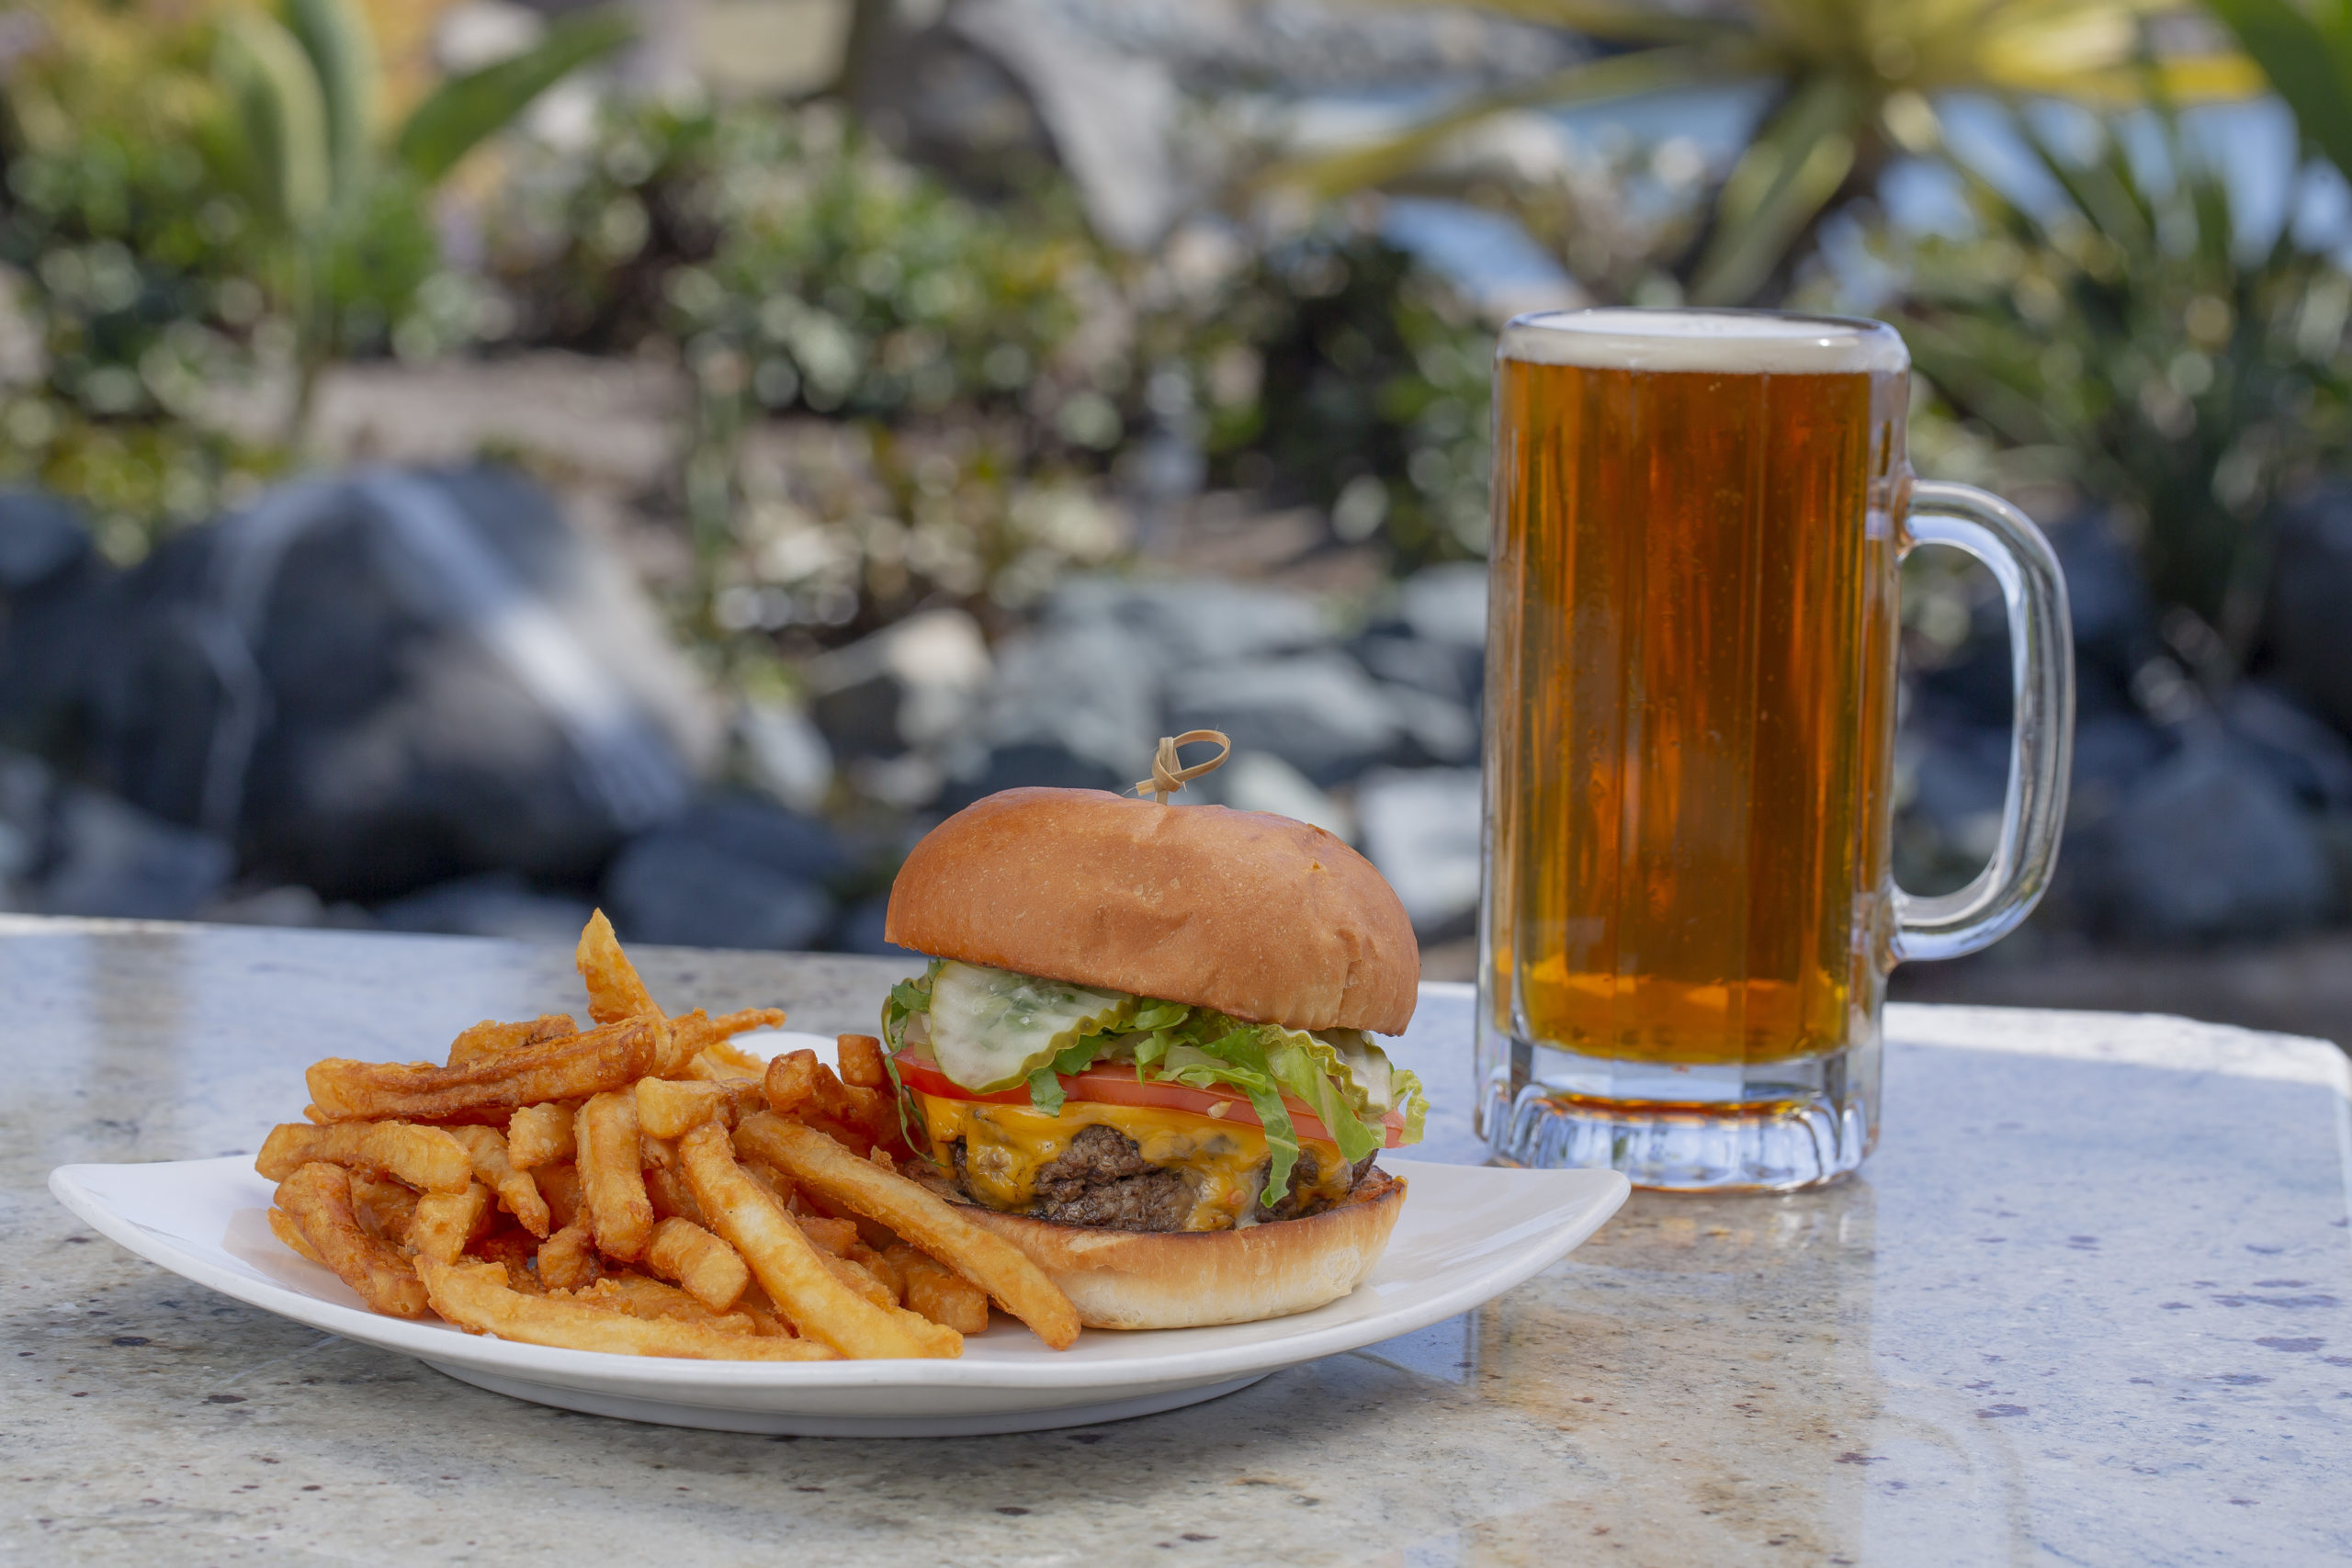 Burger and fries with tall beer